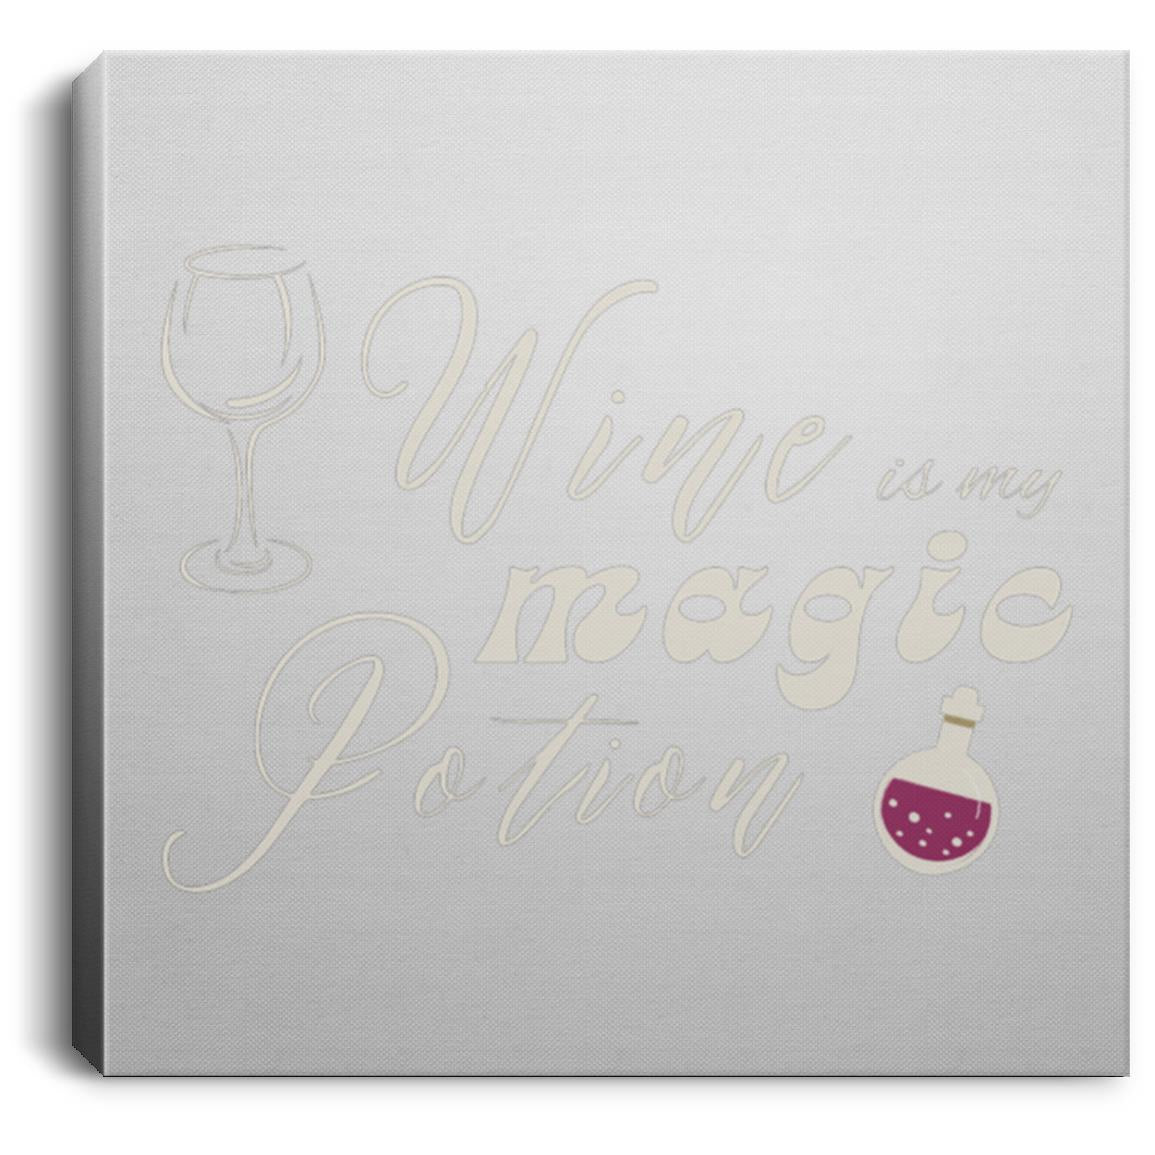 Wine is my magic potion 8x8 canvas Wine Is My Magic Potion 8x8 Halloween Canvas